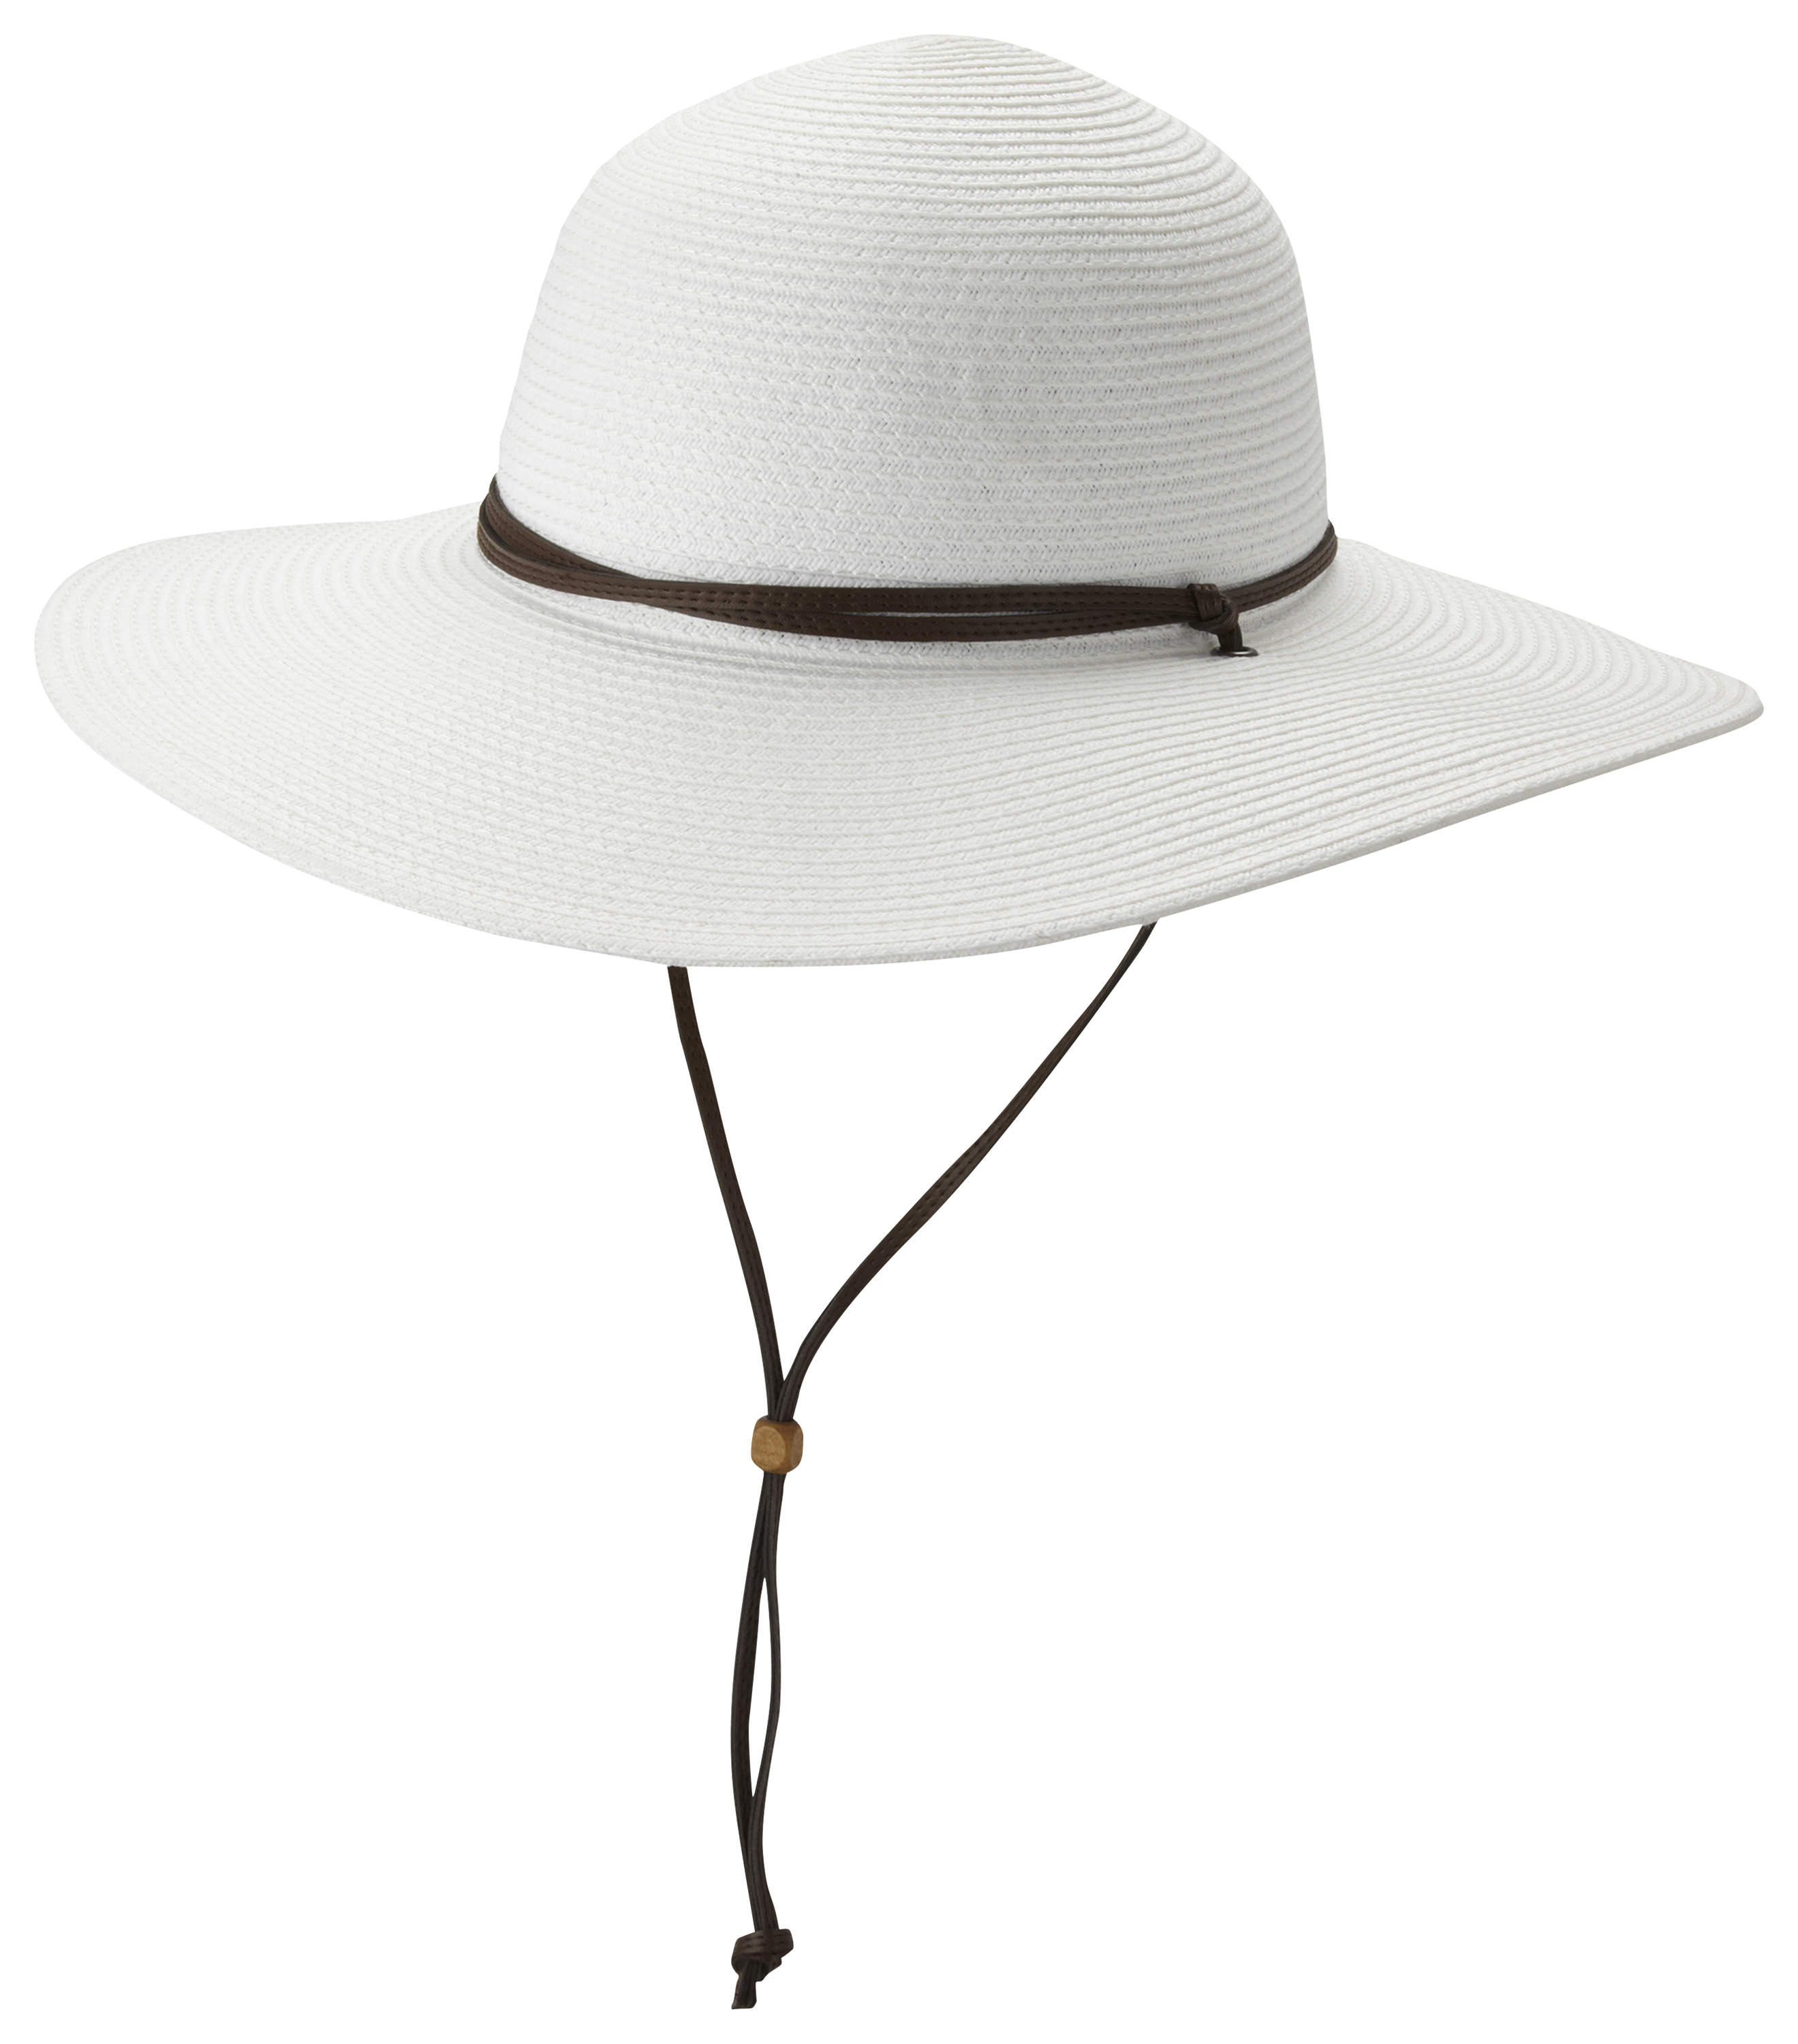 Columbia Global Adventure Packable Straw Hat for Ladies